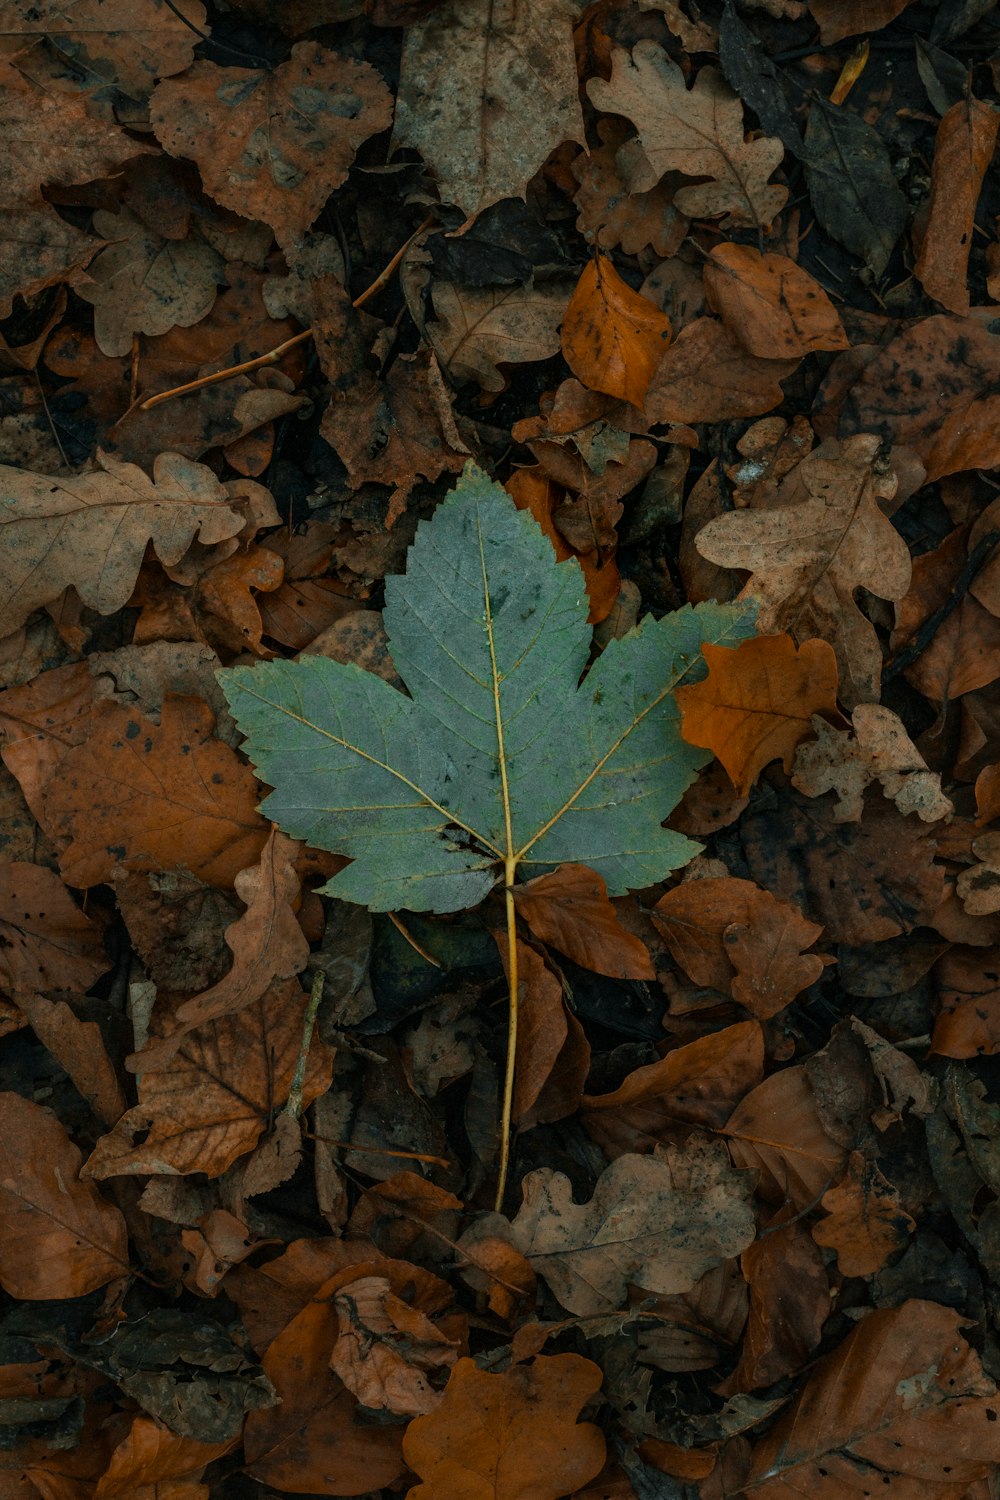 a single leaf on the ground surrounded by leaves